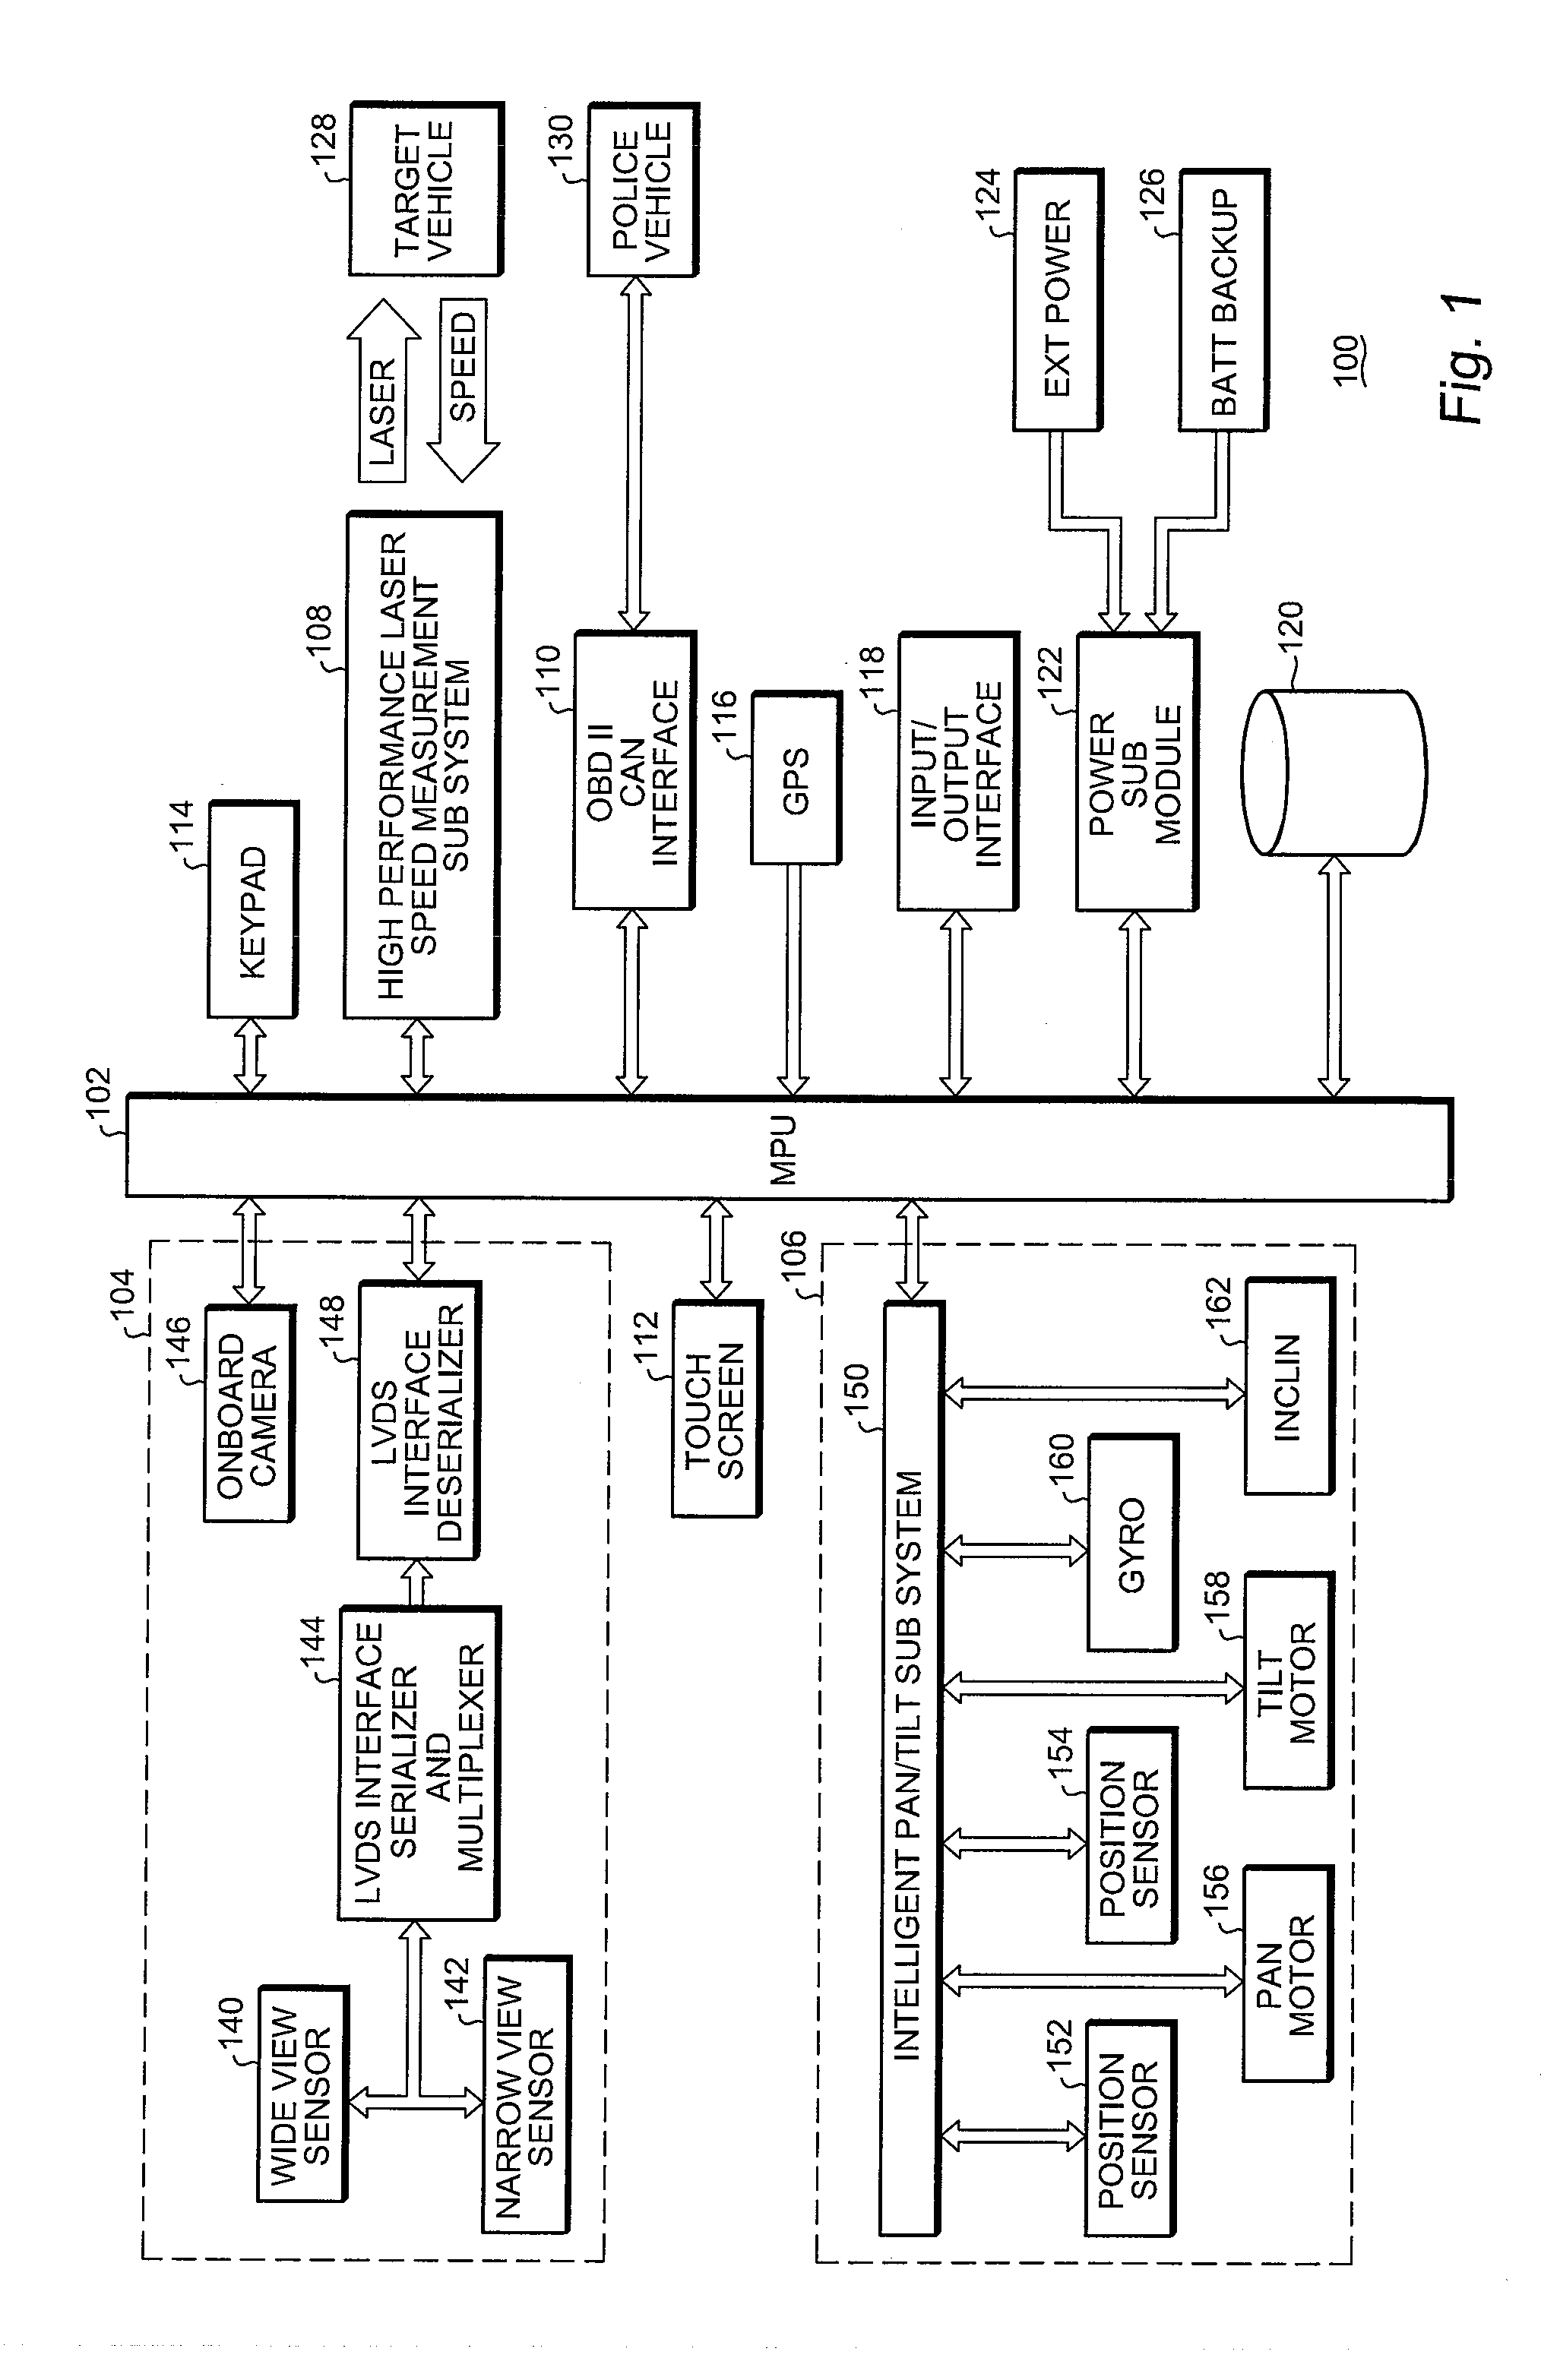 Intelligent laser tracking system and method for mobile and fixed position traffic monitoring and enforcement applications